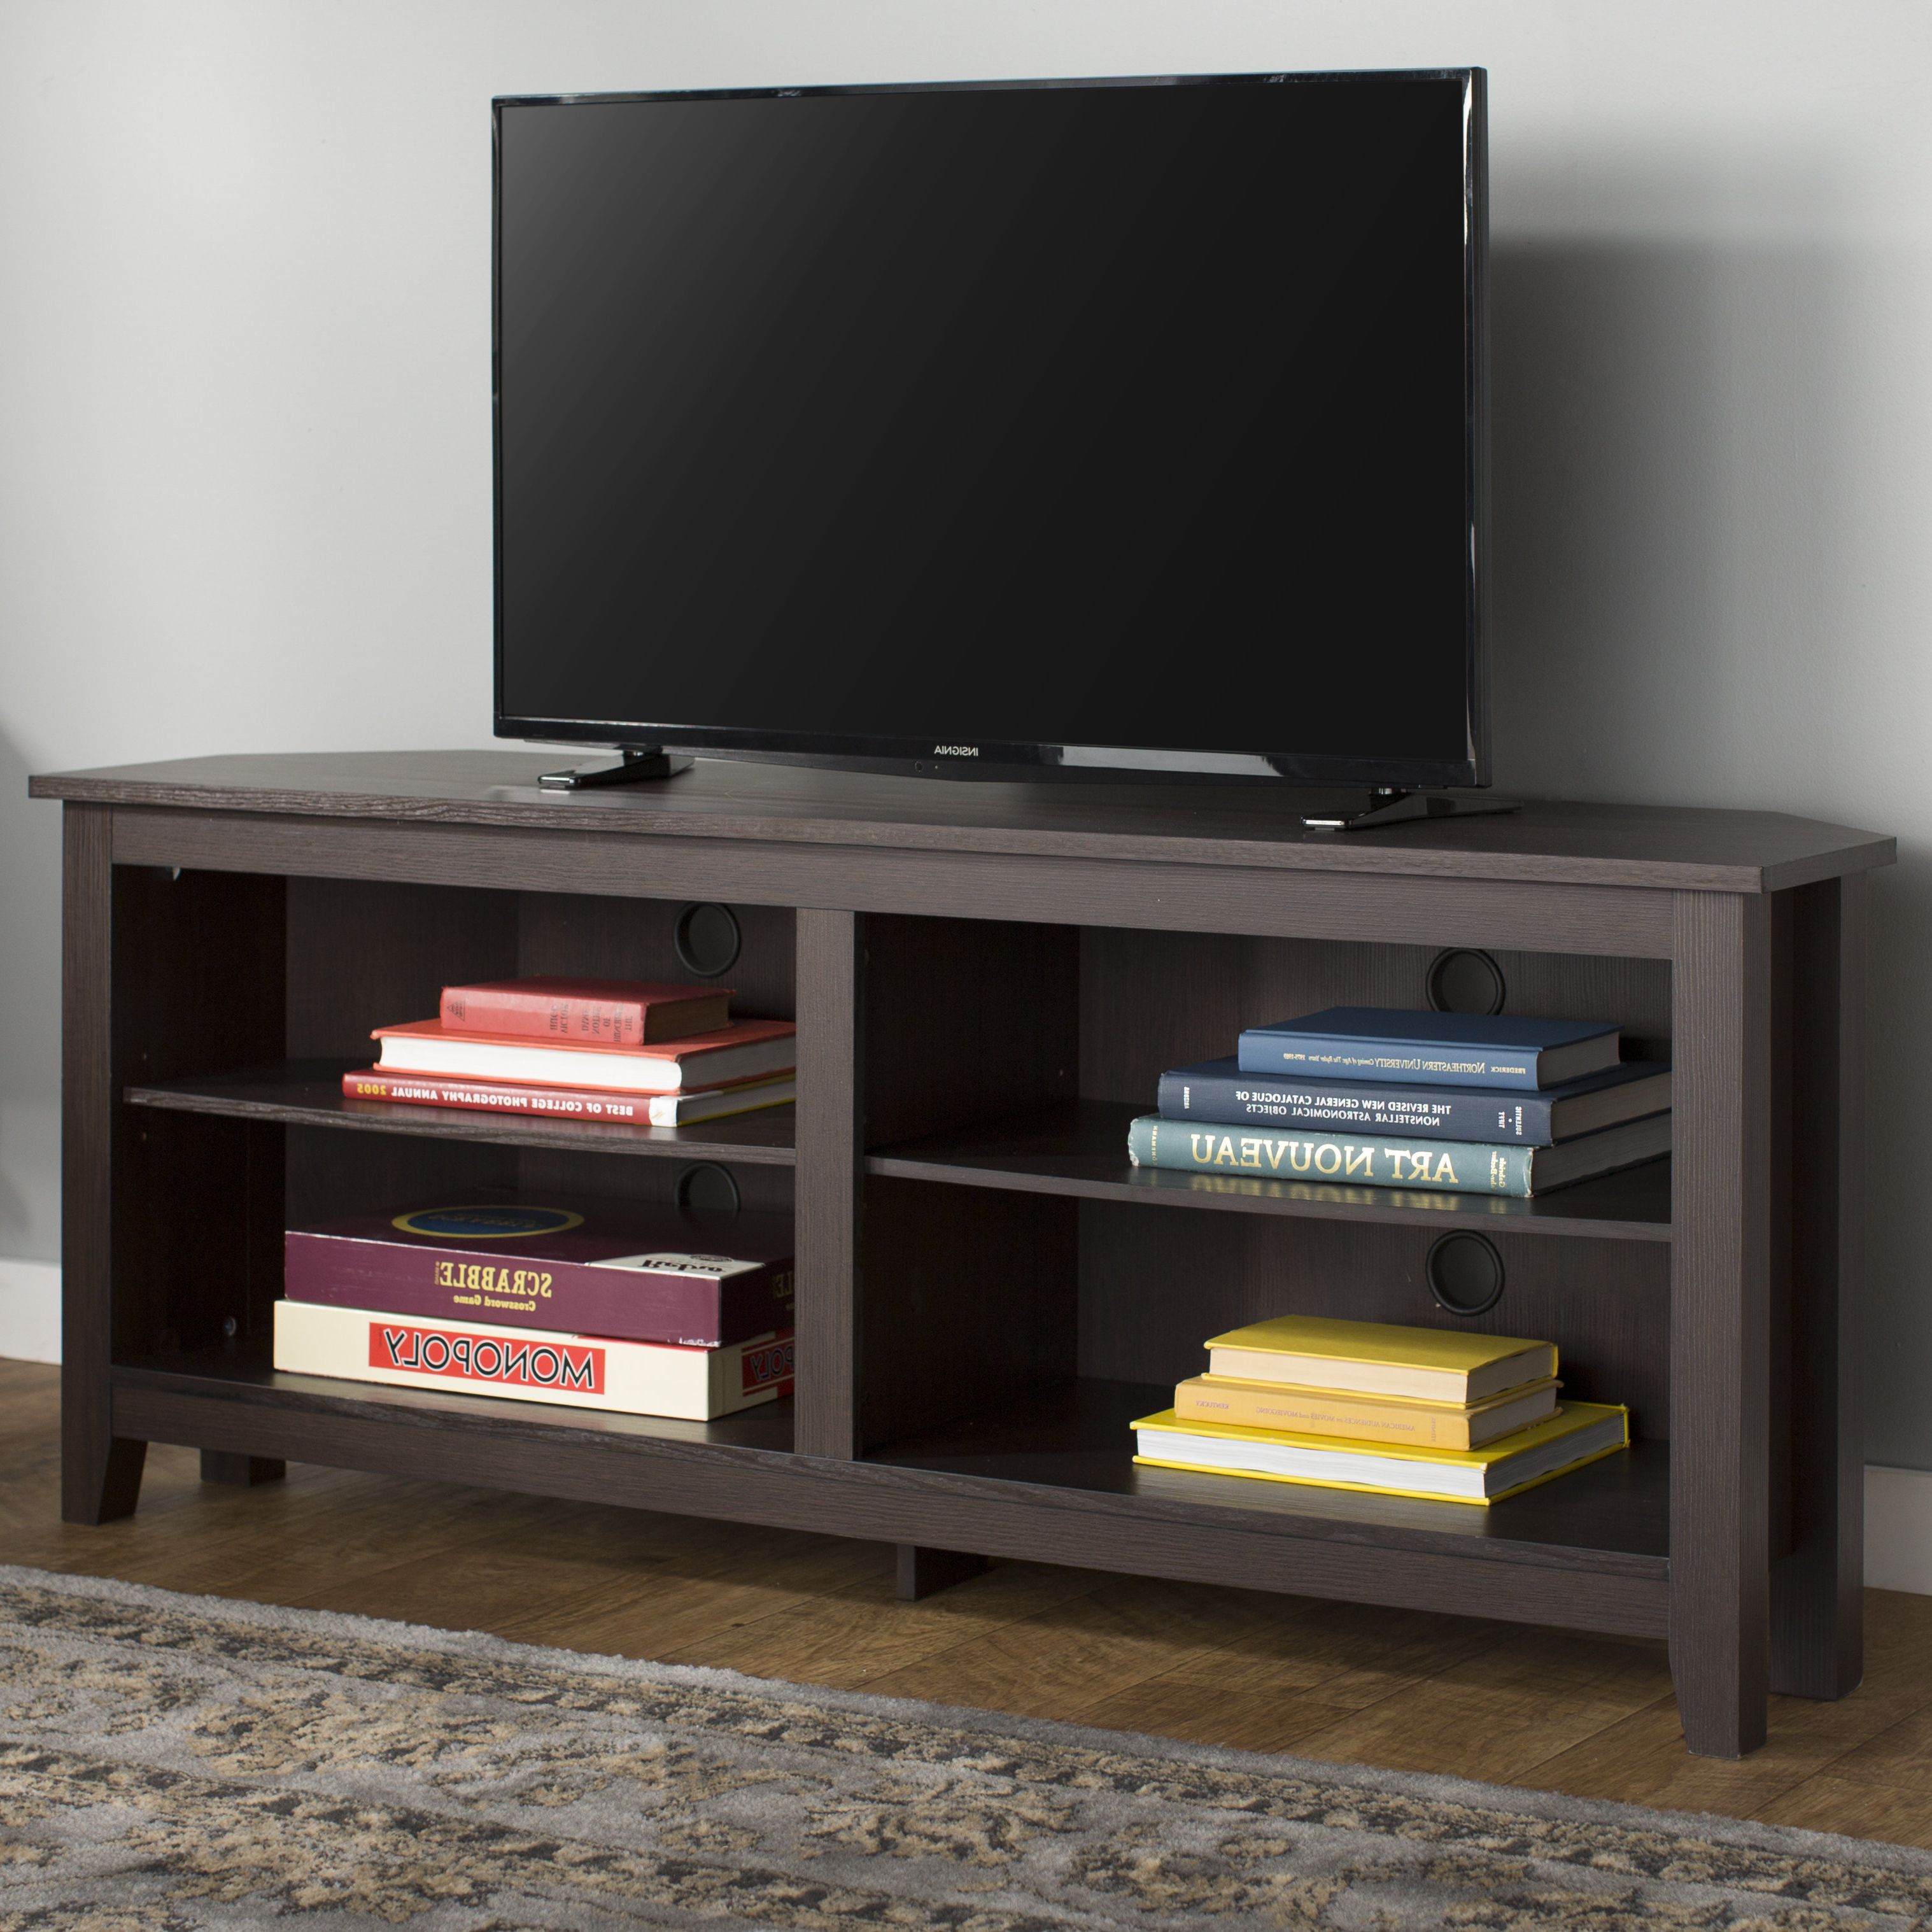 Beachcrest Home Sunbury Tv Stand For Tvs Up To 60" & Reviews | Wayfair With Oxford 70 Inch Tv Stands (Gallery 19 of 20)